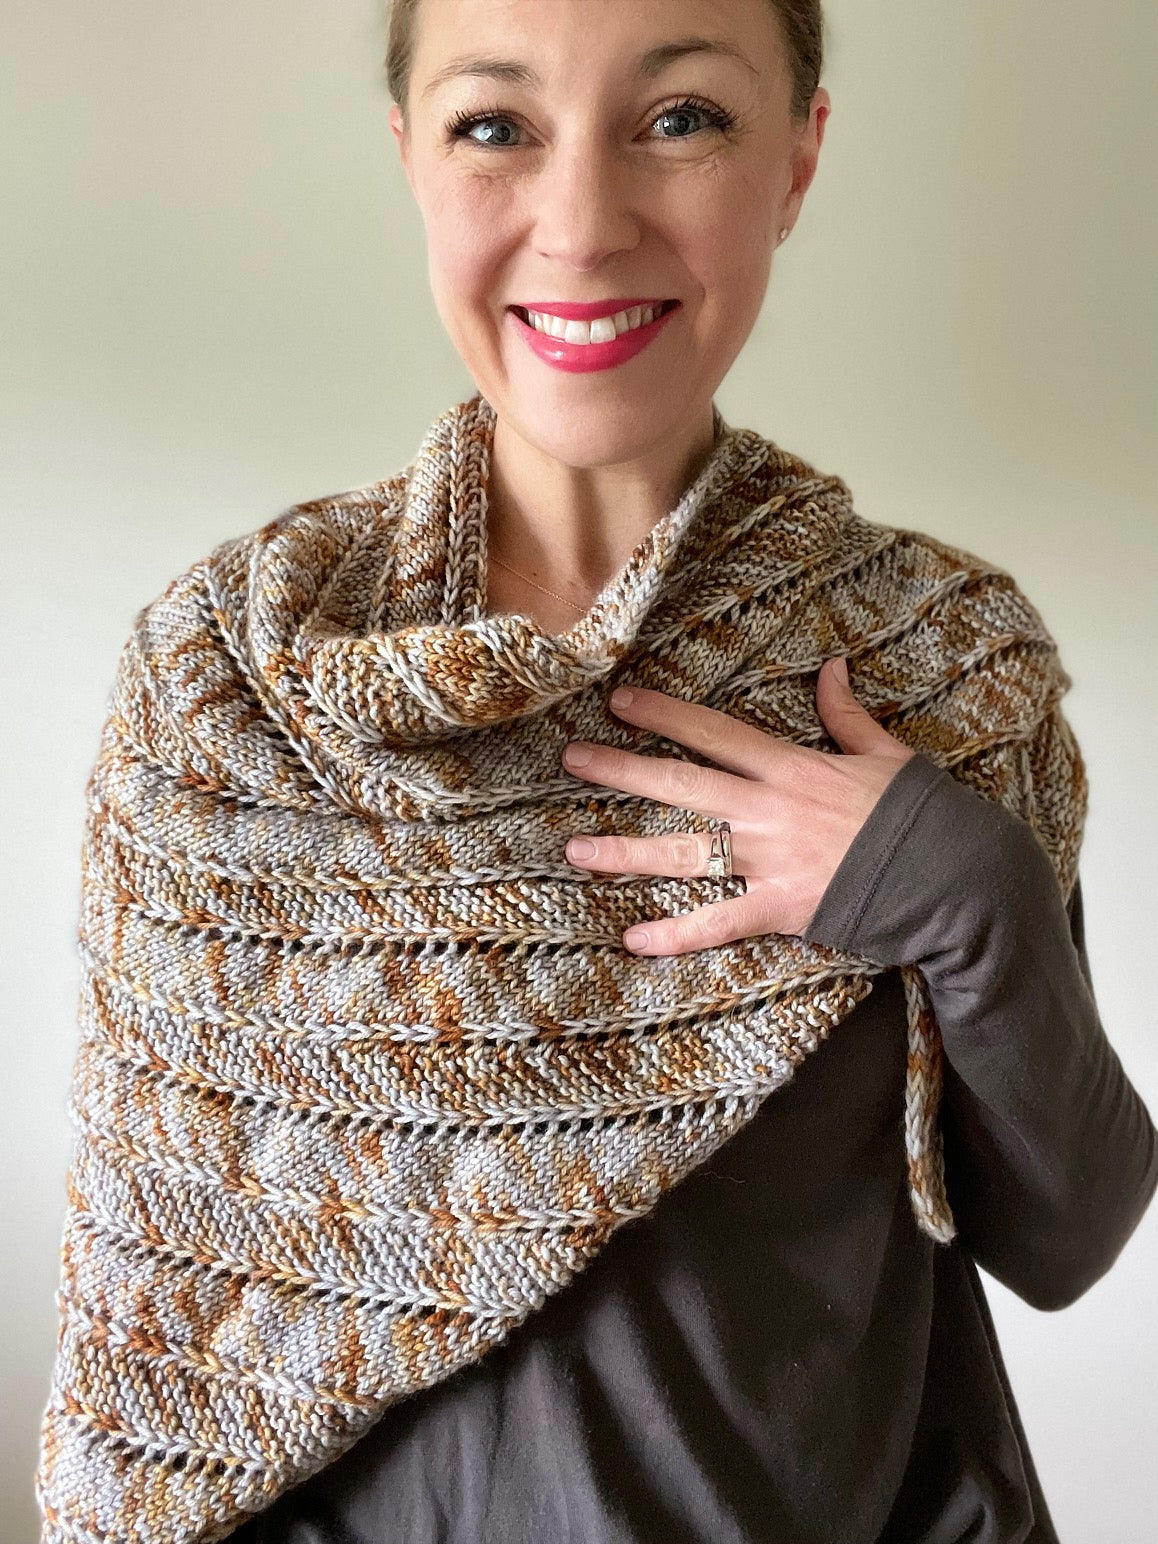 ESSENTIAL VARIEGATED SHAWL KNIT PROJECT CHOICE (OPTIONAL CLASS)